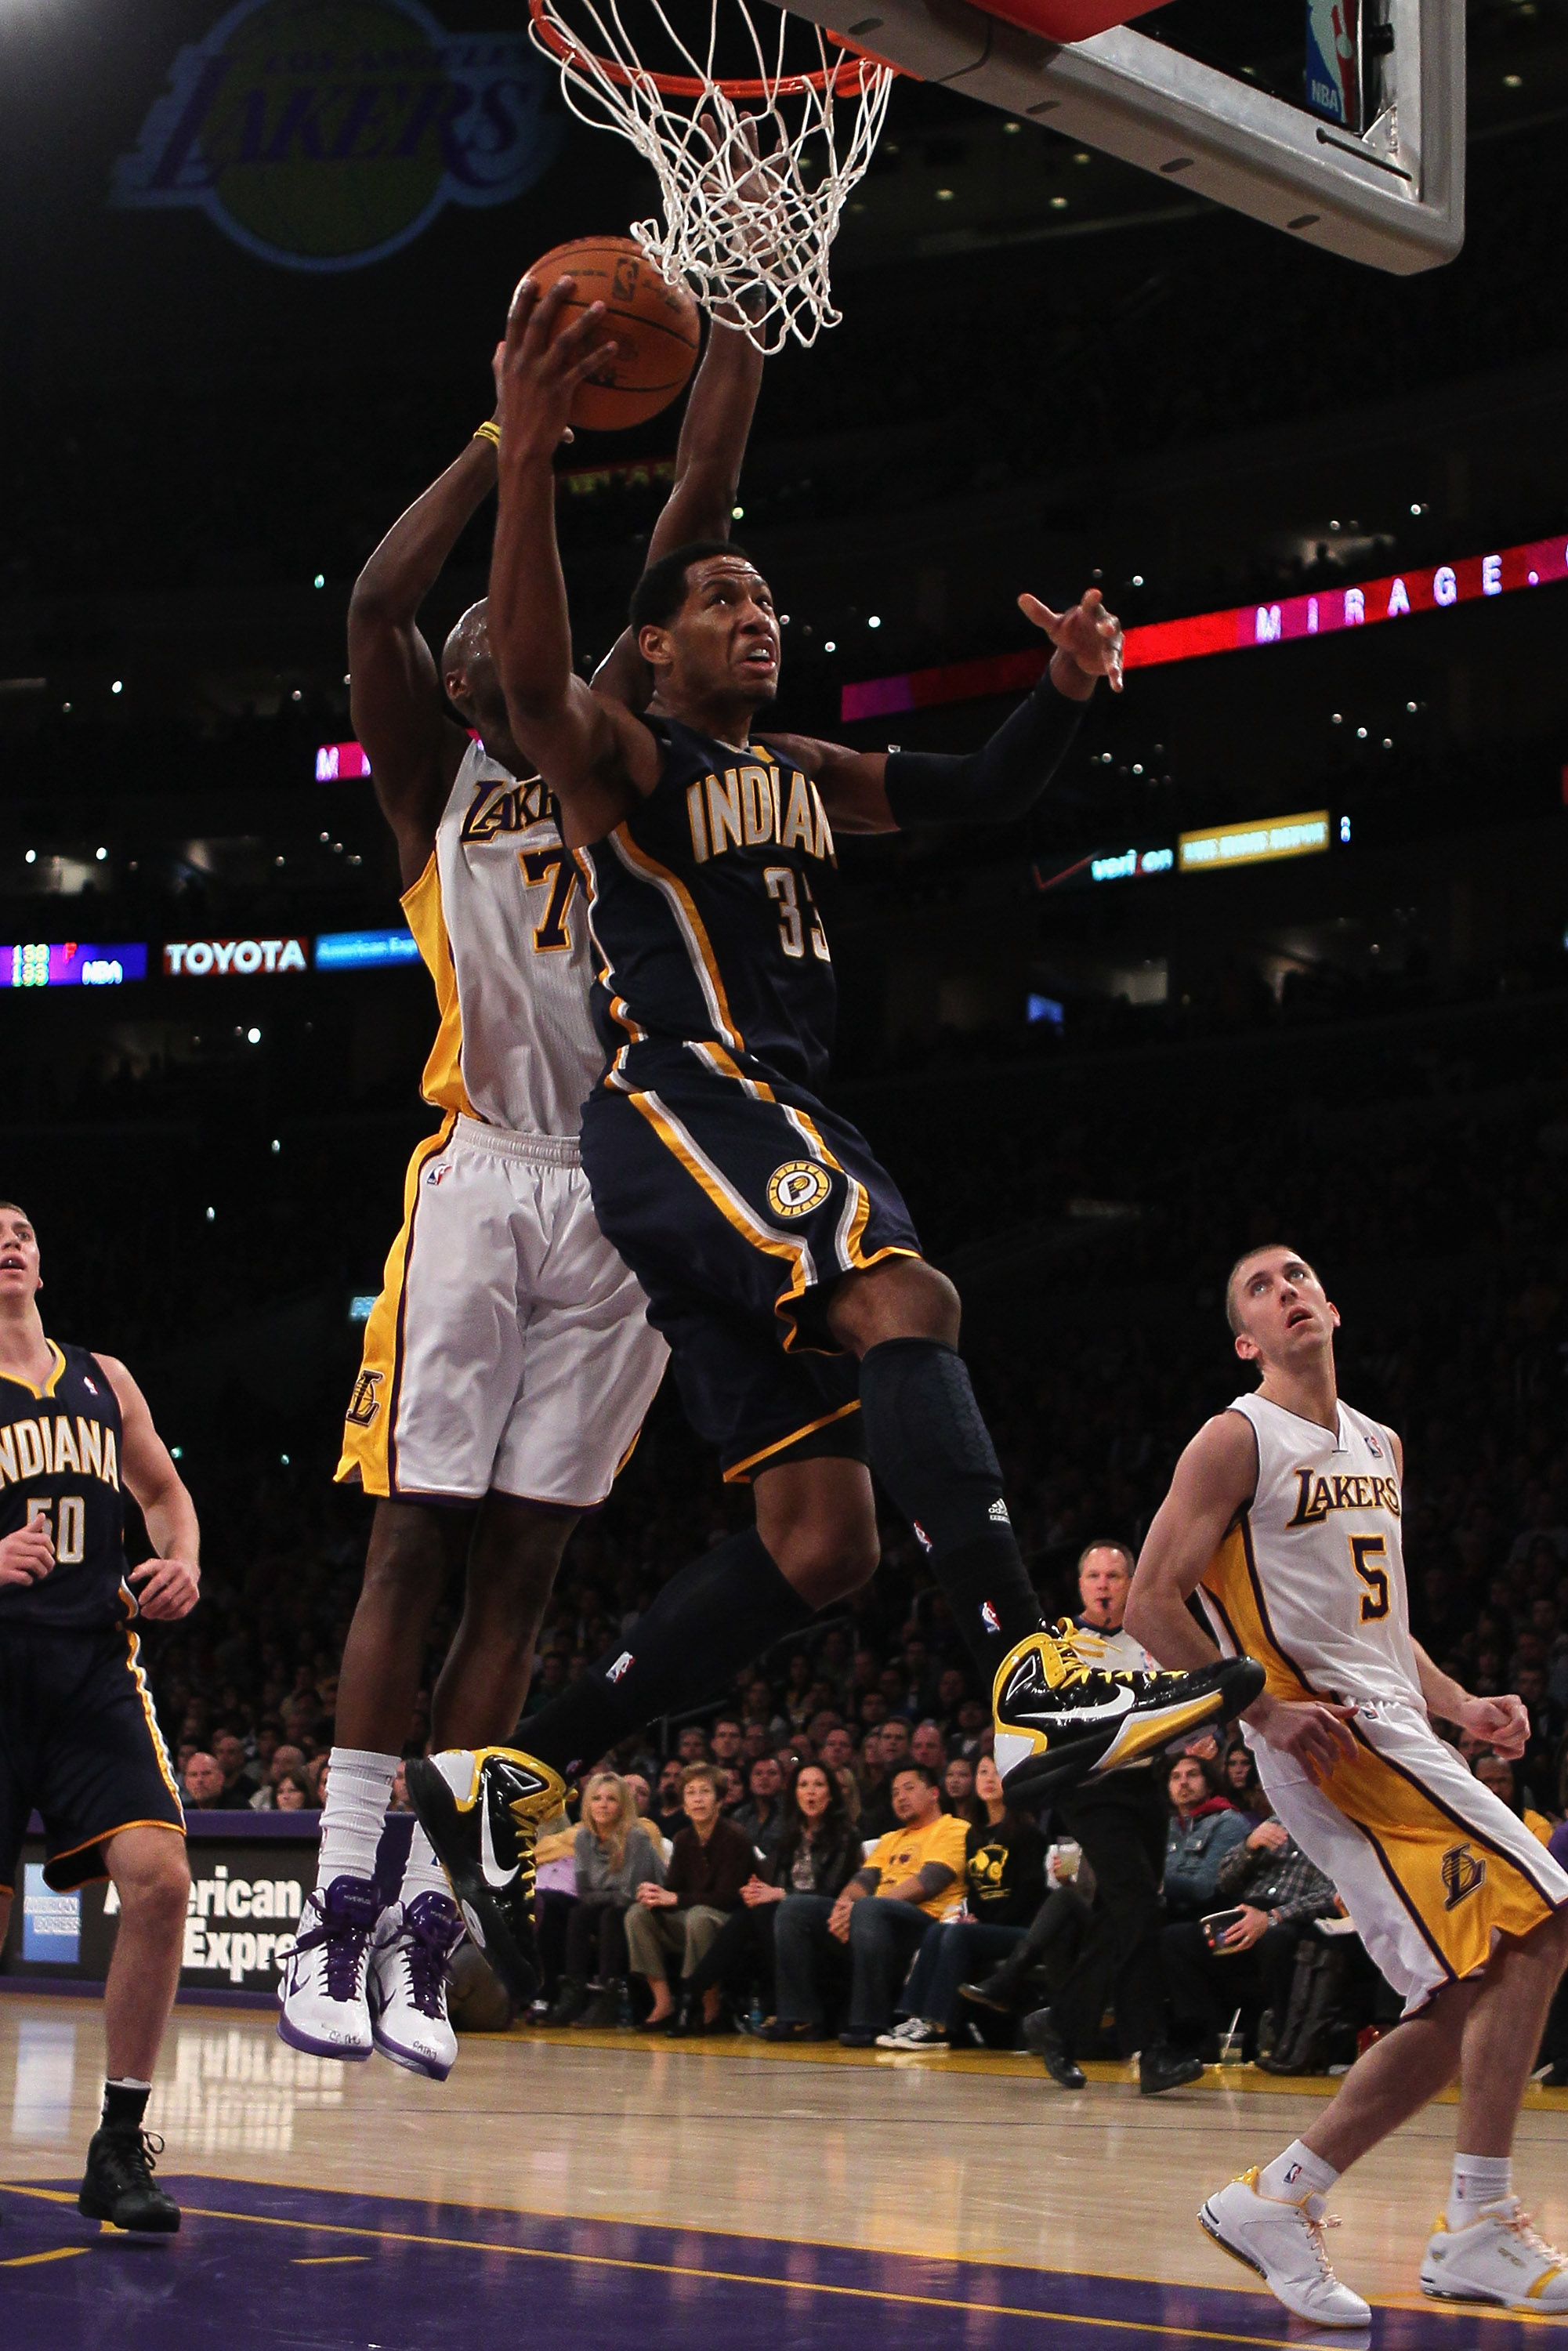 LOS ANGELES, CA - NOVEMBER 28:  Danny Granger #33 of the Indiana Pacers drives to the basket past  Lamar Odom #7 of the Los Angeles Lakers during the fourth quarter at Staples Center on November 28, 2010 in Los Angeles, California. The Pacers defeated the